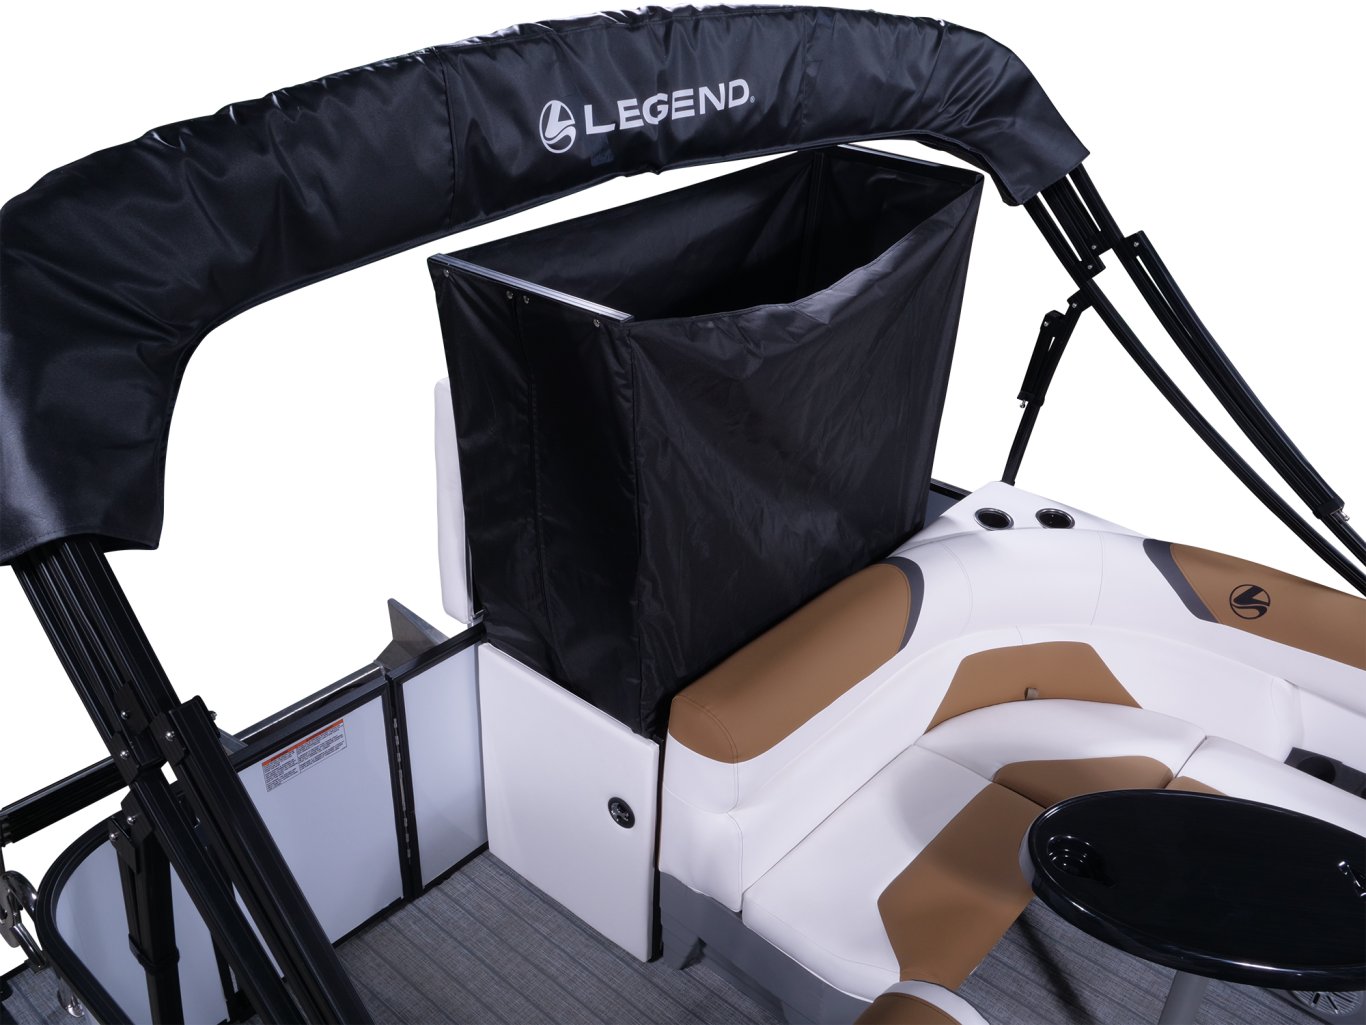 Legend Boats E Series 23 Cruise Ext 3 Tube Sport Package